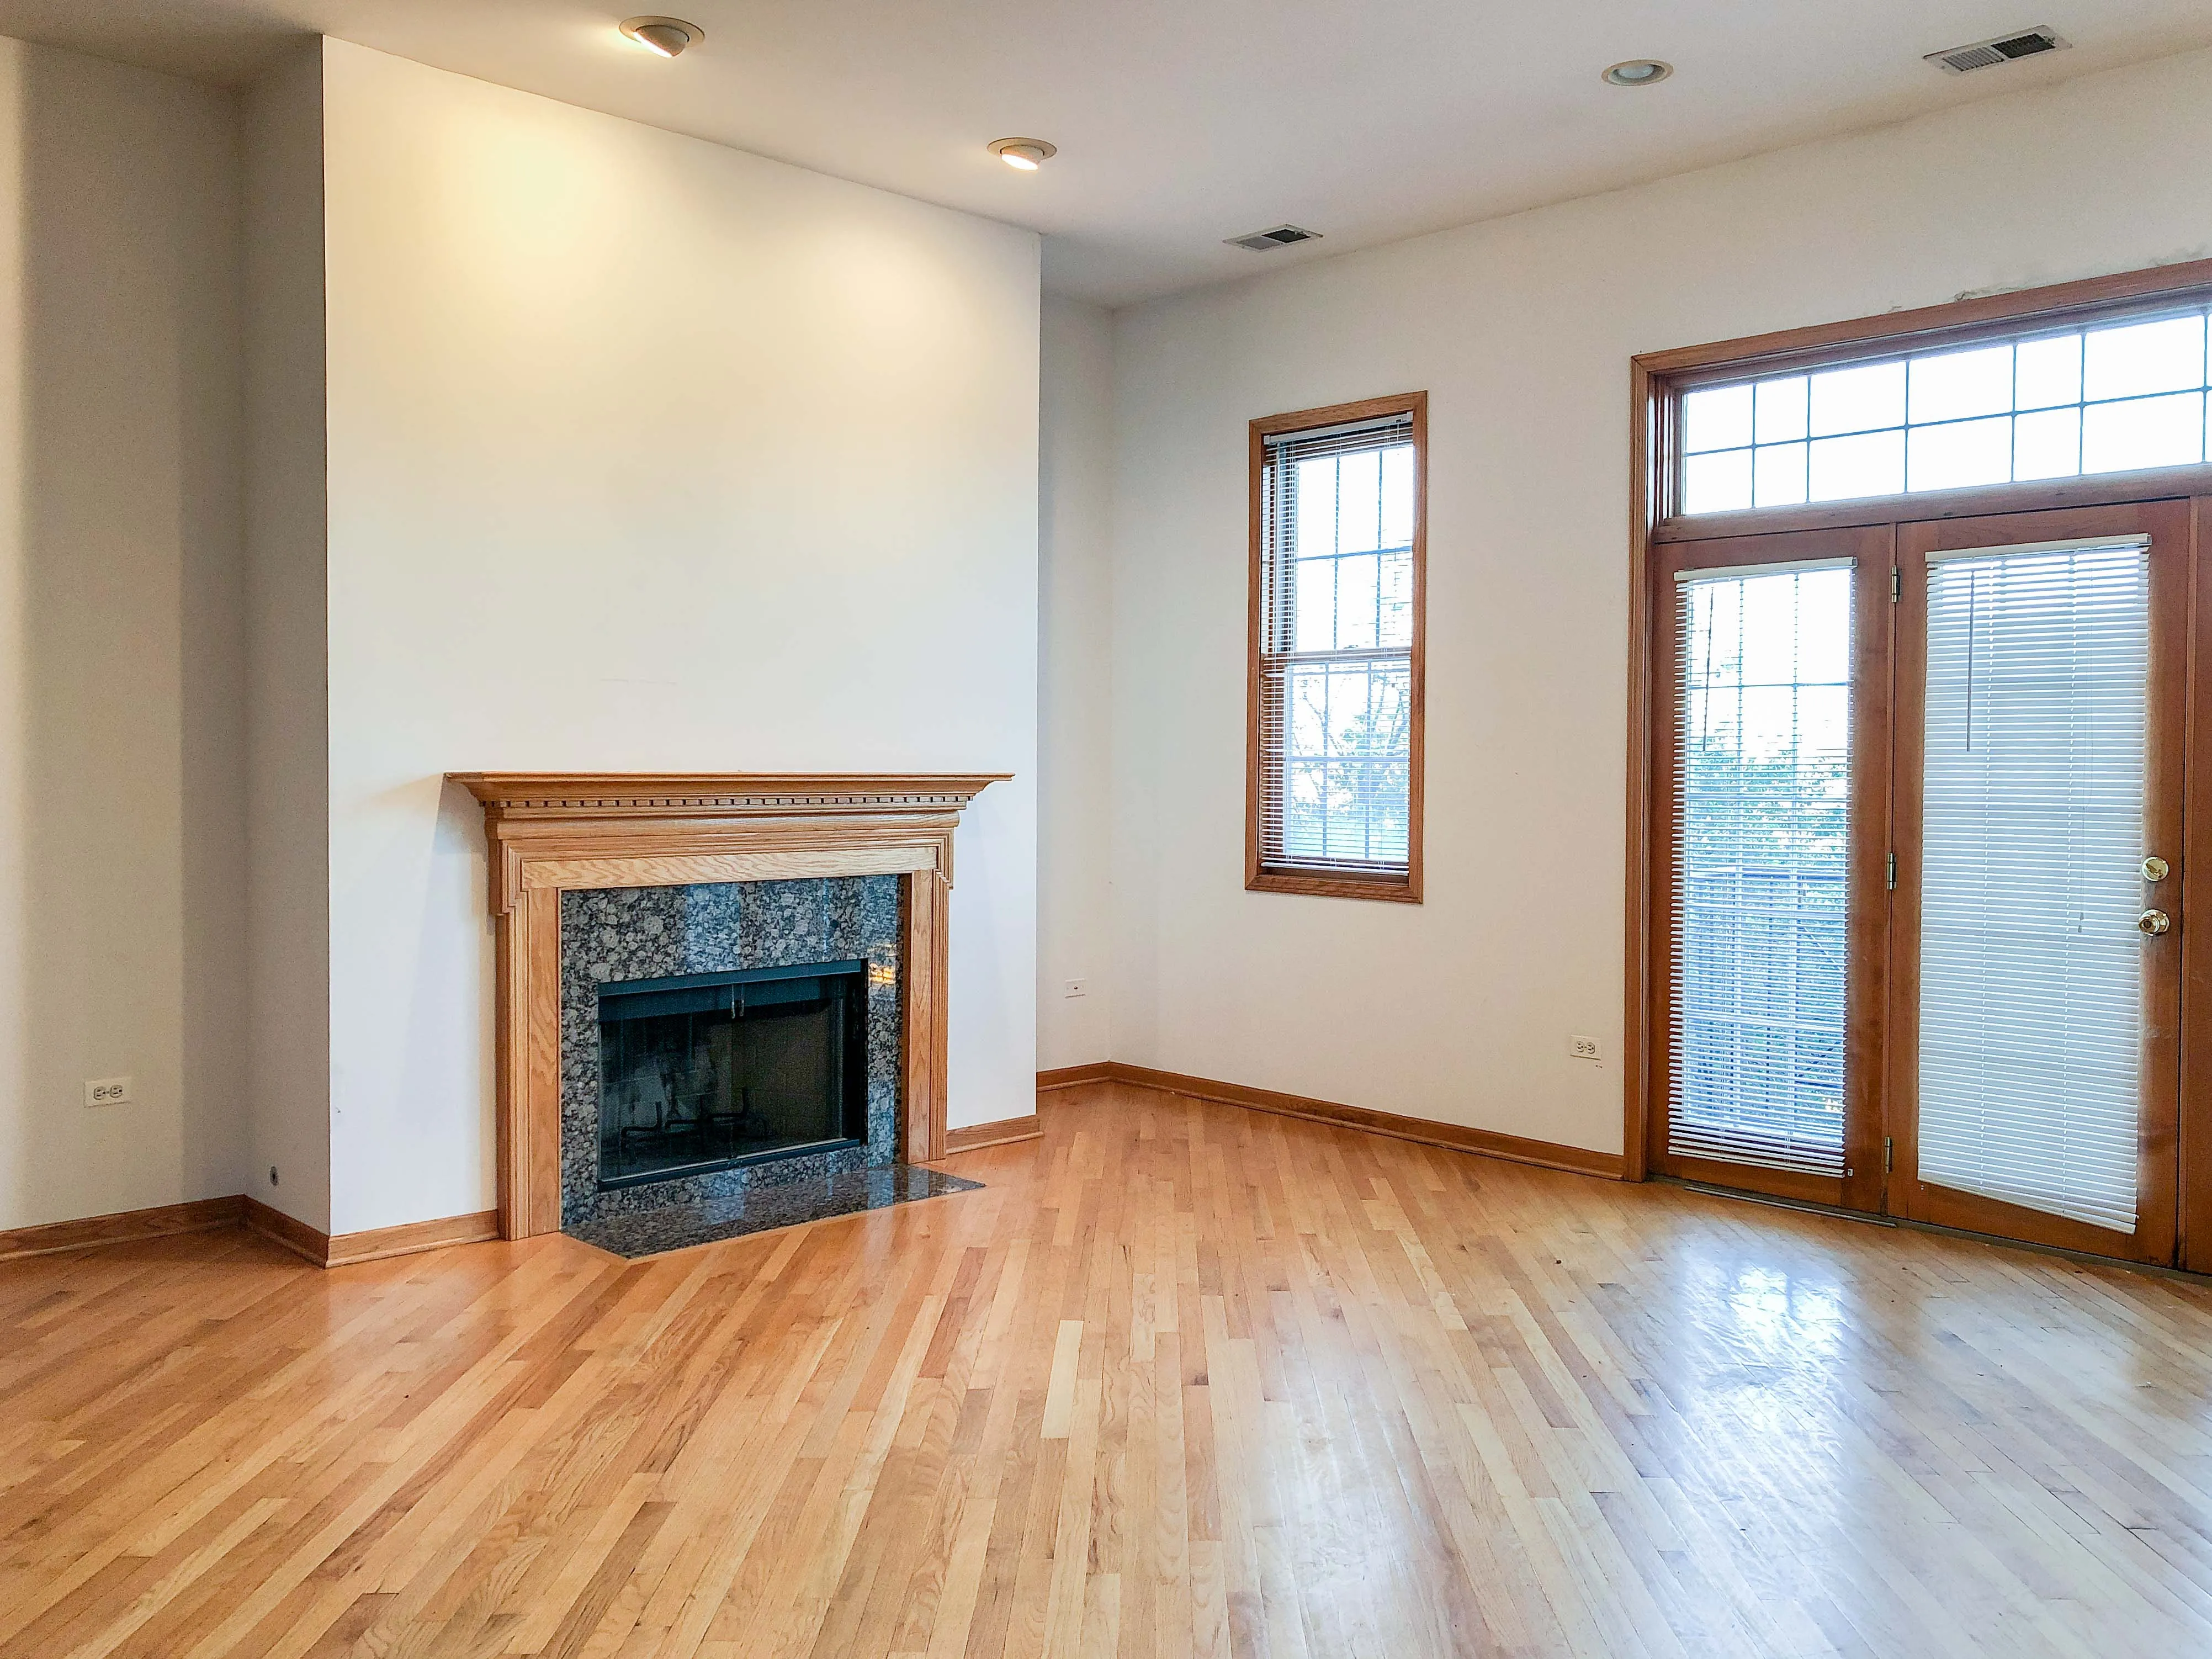 2535 N SOUTHPORT AVE 60614-unit#4S-Chicago-IL